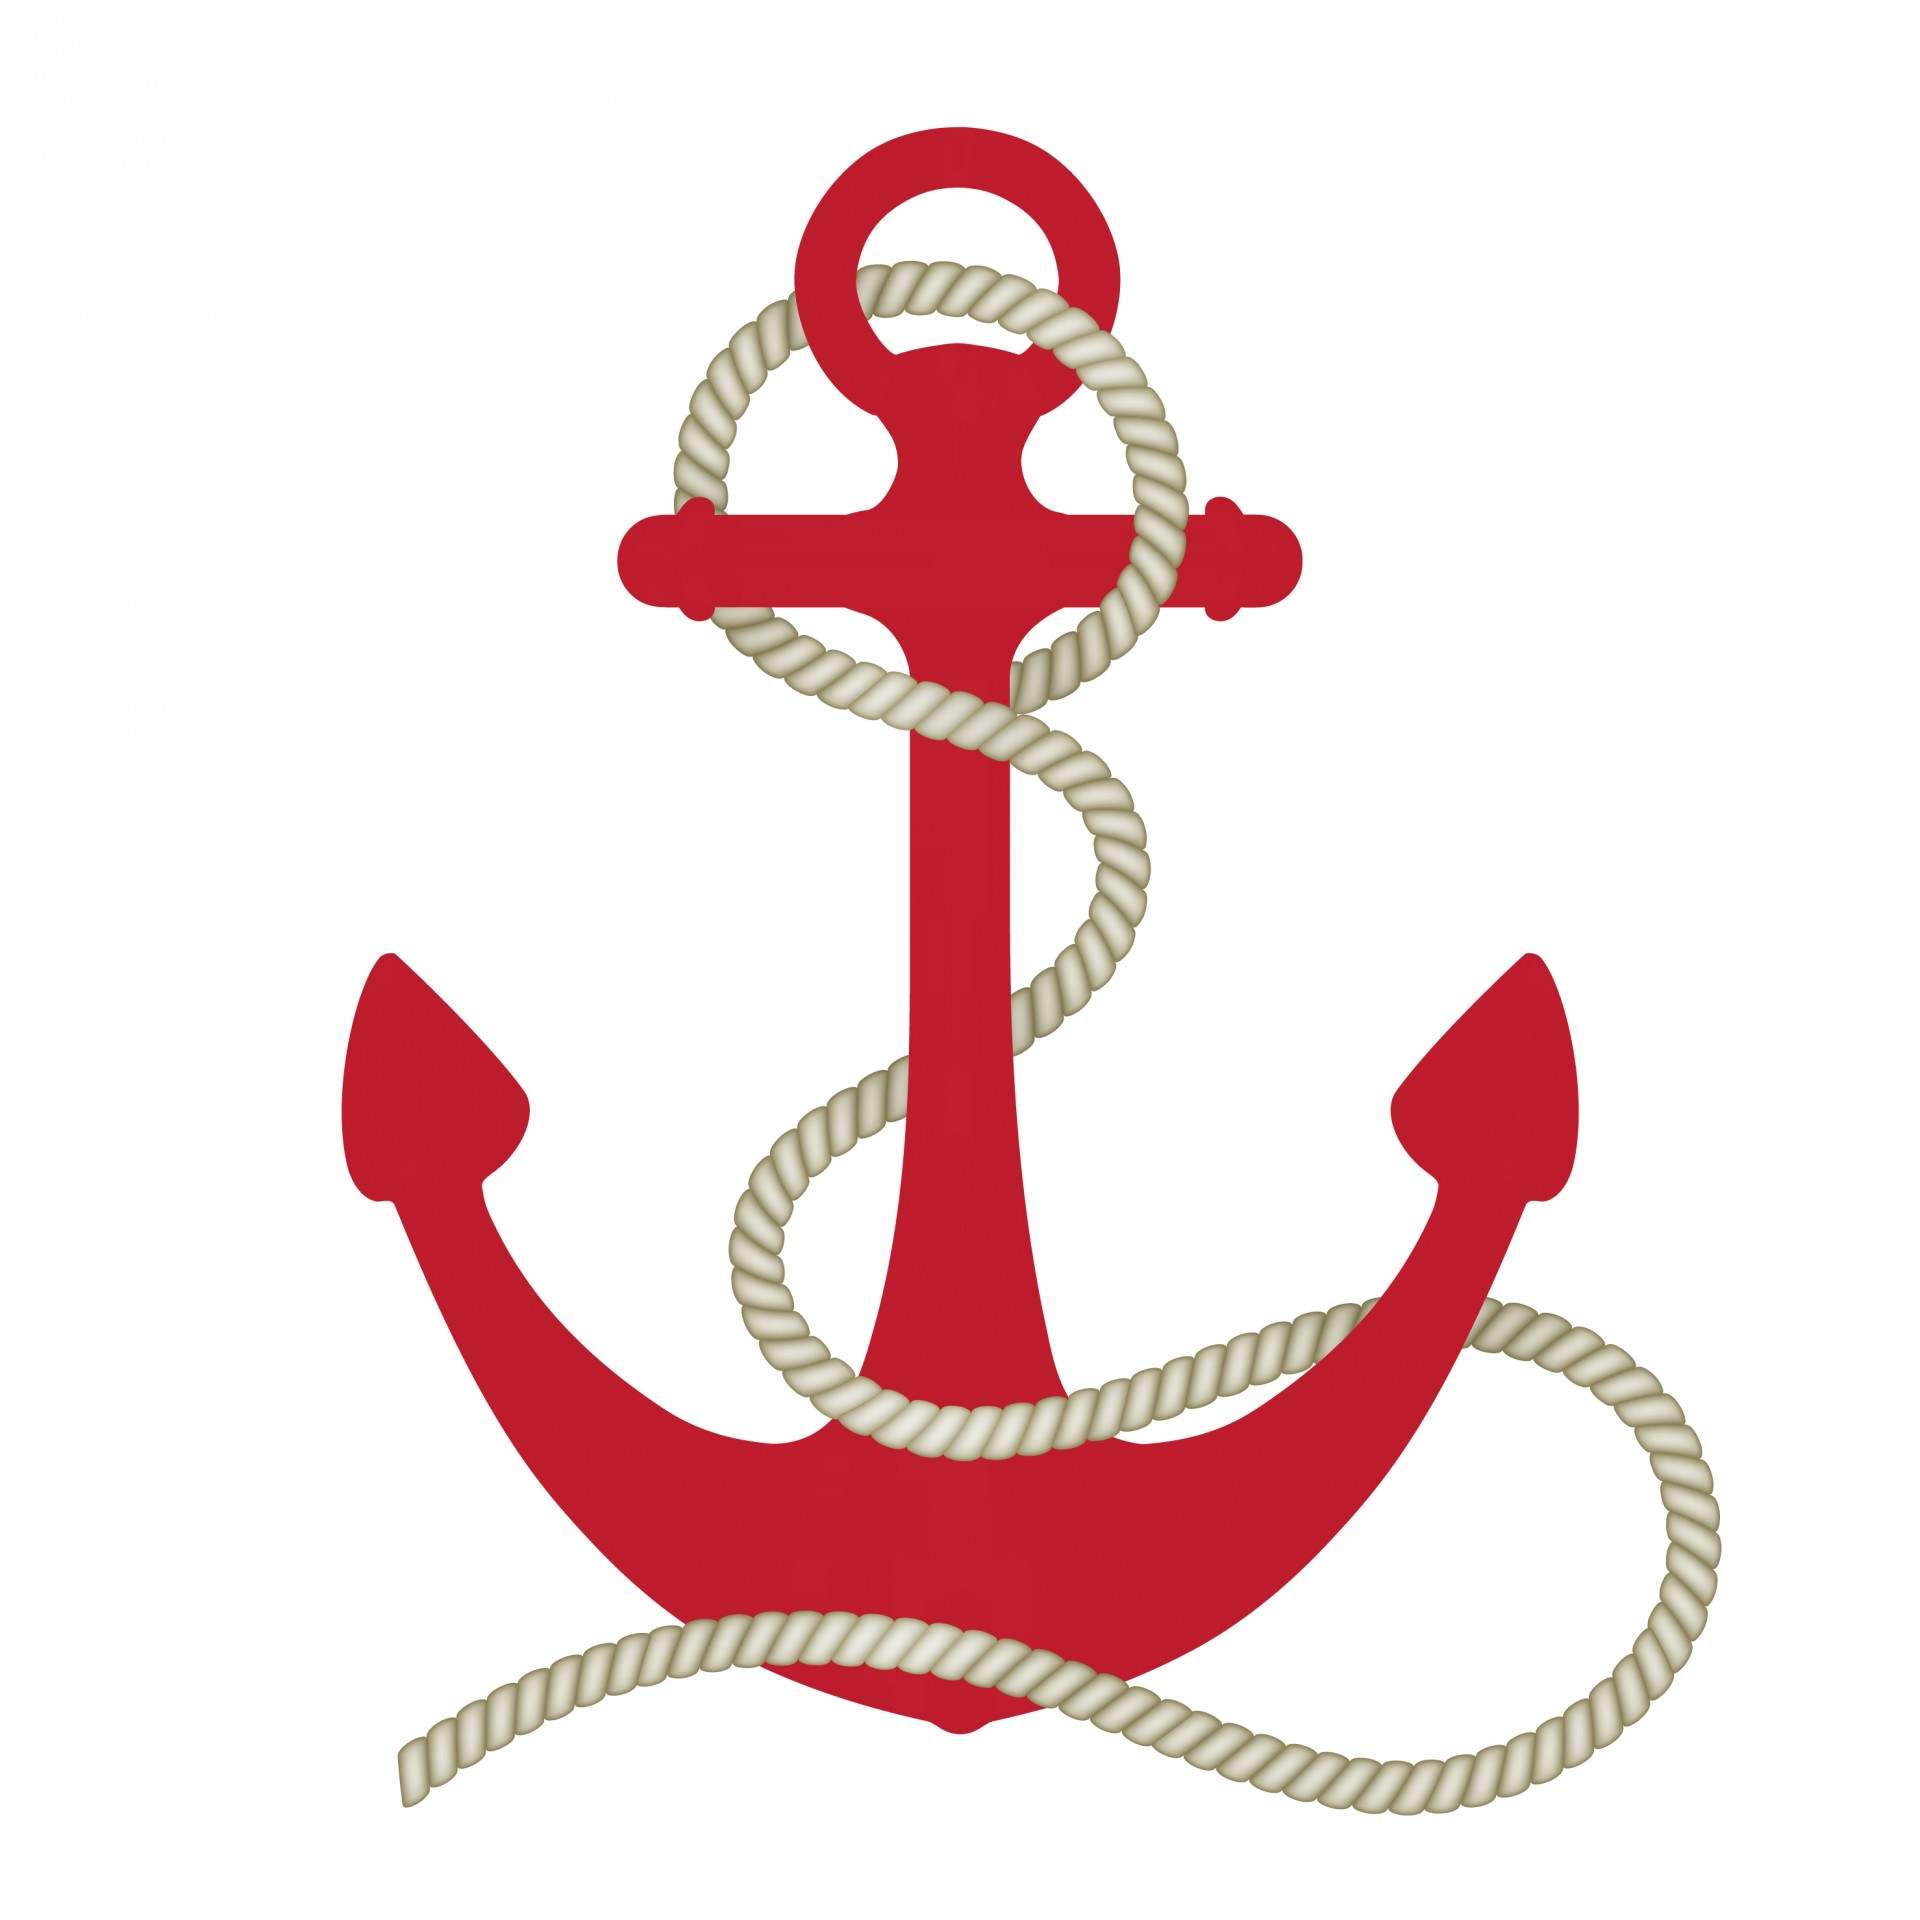 Download free photo of Anchor,rope,nautical,red,entwined - from